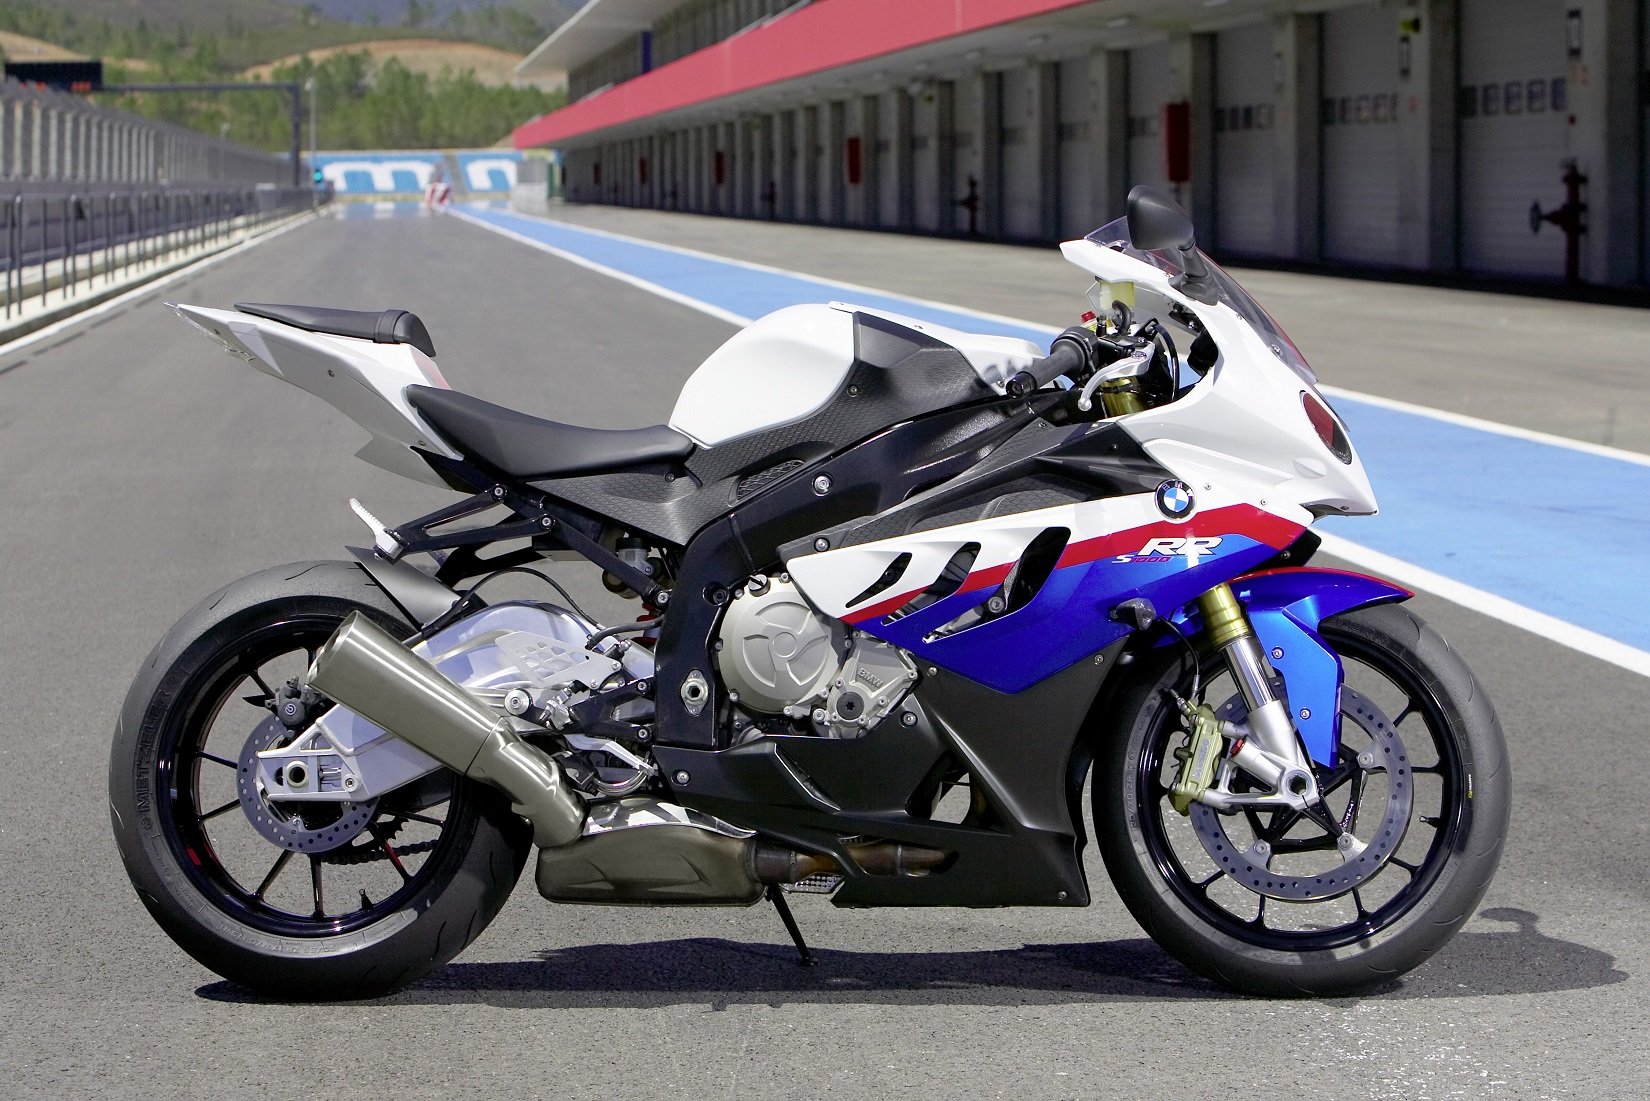 bmw, S 1000 rr, Motorcycles, 2009 Wallpaper